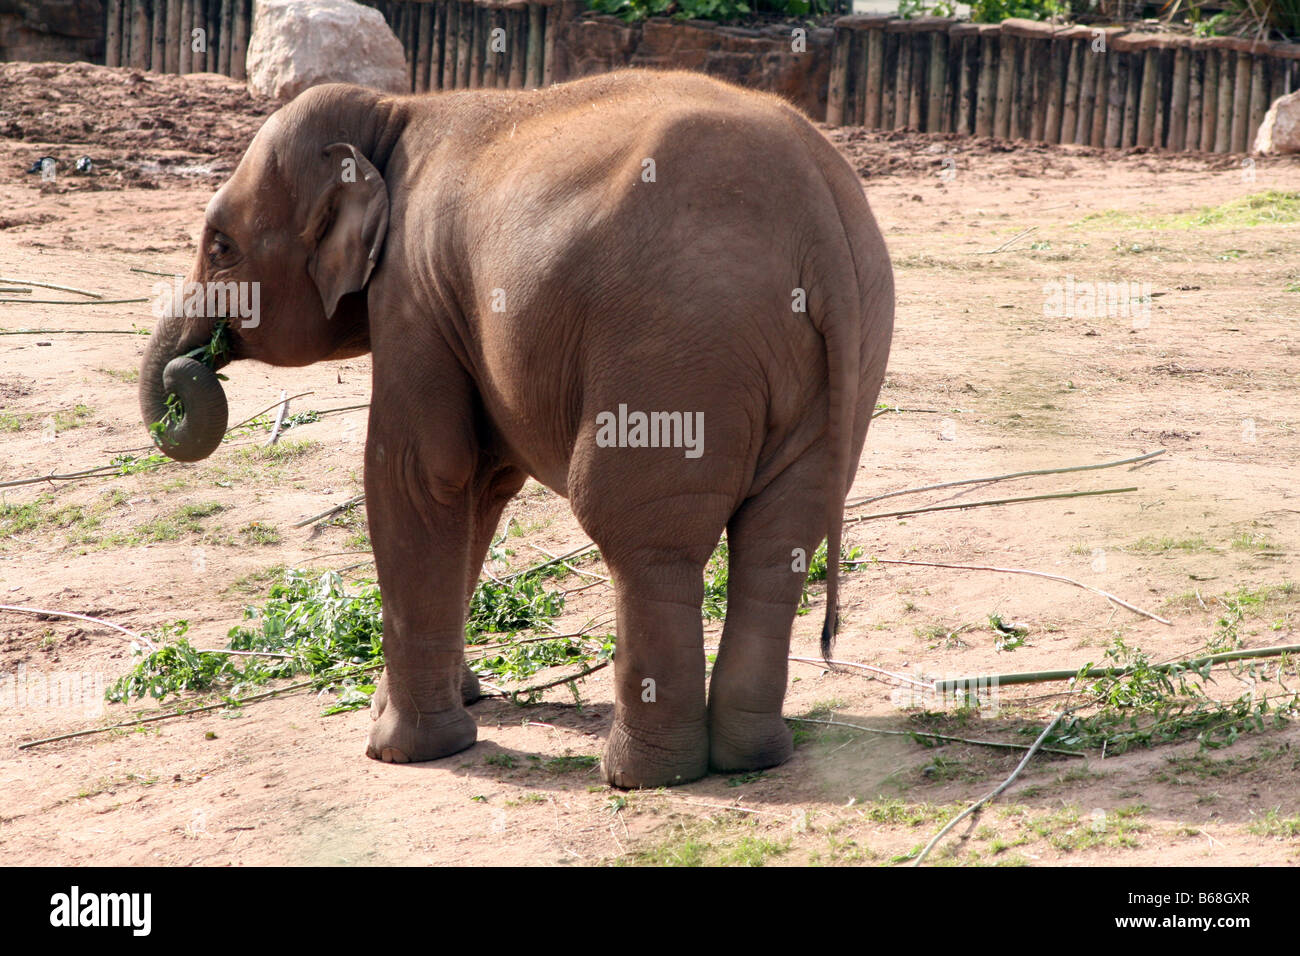 Asian, Asiatic, Indian Elephant (Elephas Maximus) [Chester Zoo, Chester, Cheshire, England, Great Britain, United Kingdom].    . Stock Photo